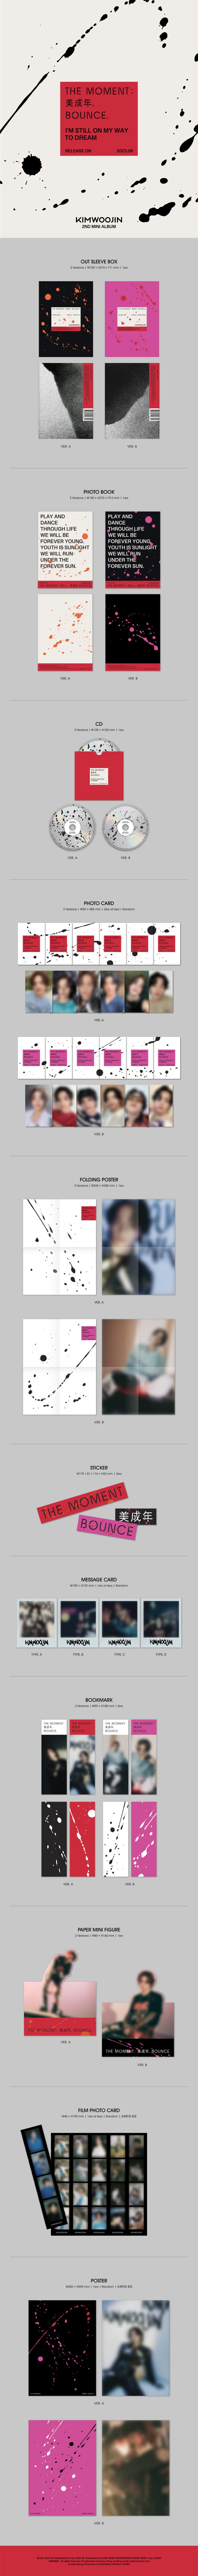 1 CD
1 Photo Book 
2 Photo Cards (random out of 6 types)
1 Folding Poster 
3 Stickers
1 Message Card (random out of 4 type...